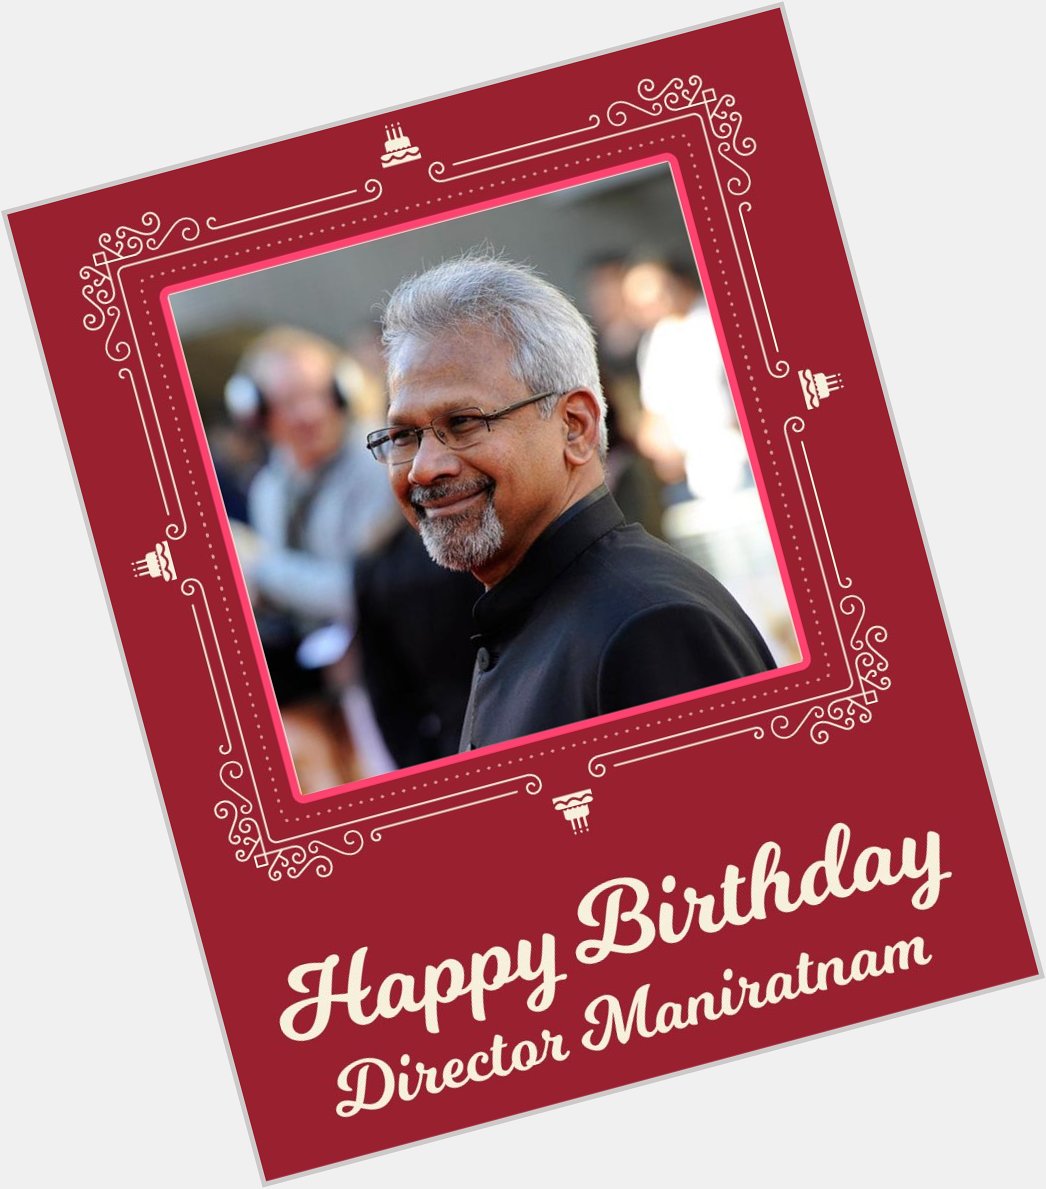 Happy Birthday wishes to our Beloved Mani Ratnam SIR ,mam convey our wishes from  